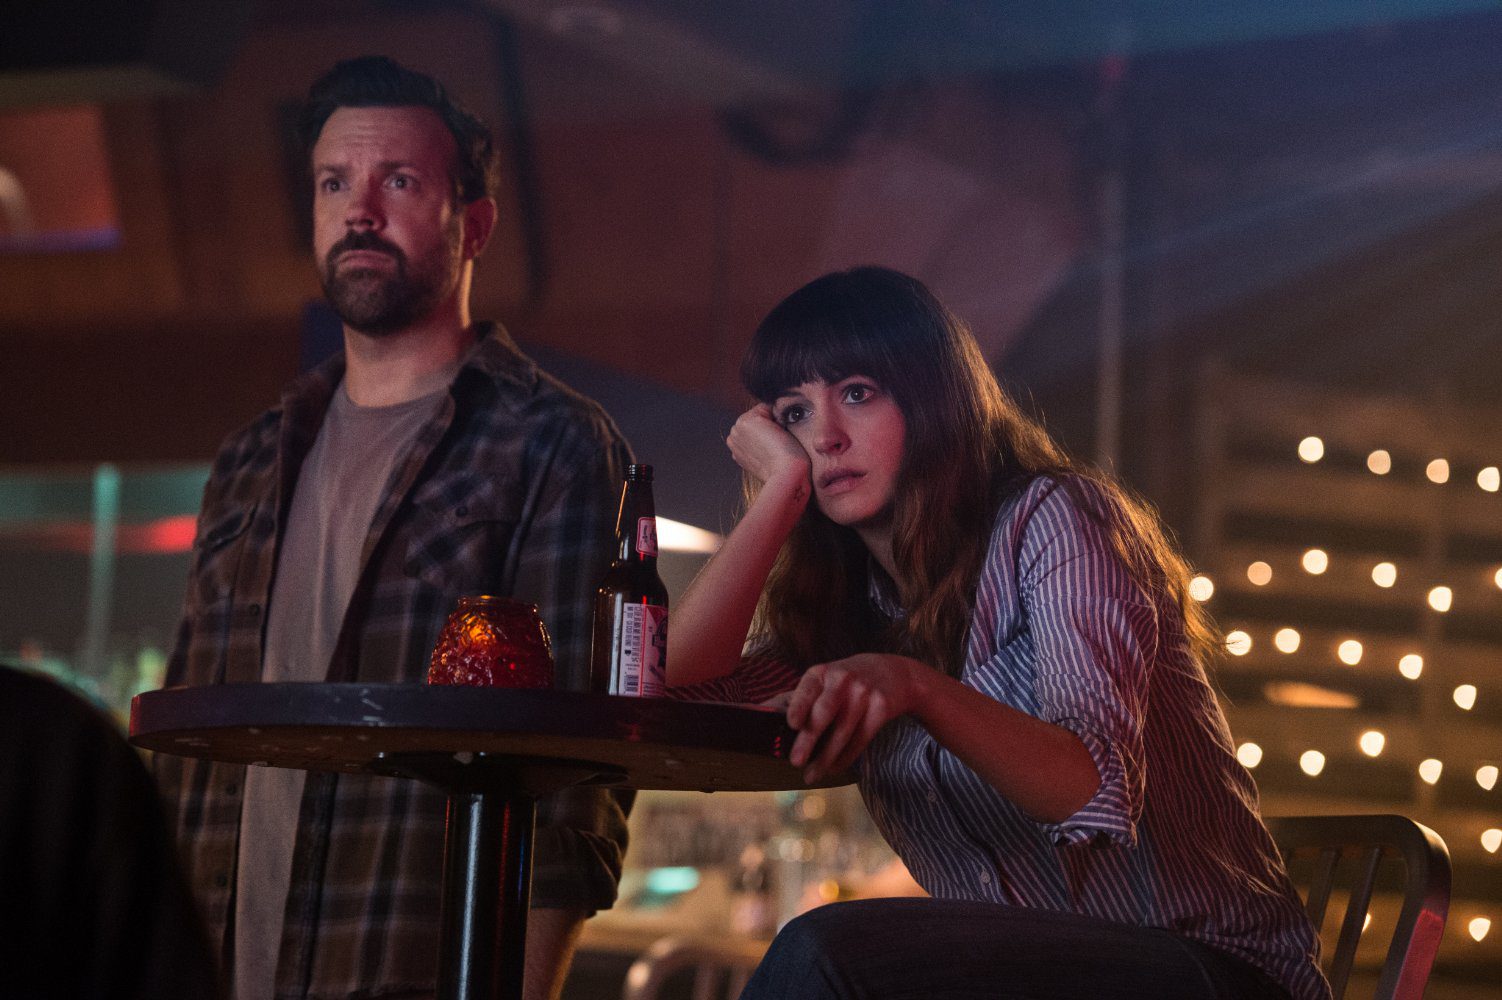 New Trailer for Anne Hathaway/Jason Sudeikis Film Colossal